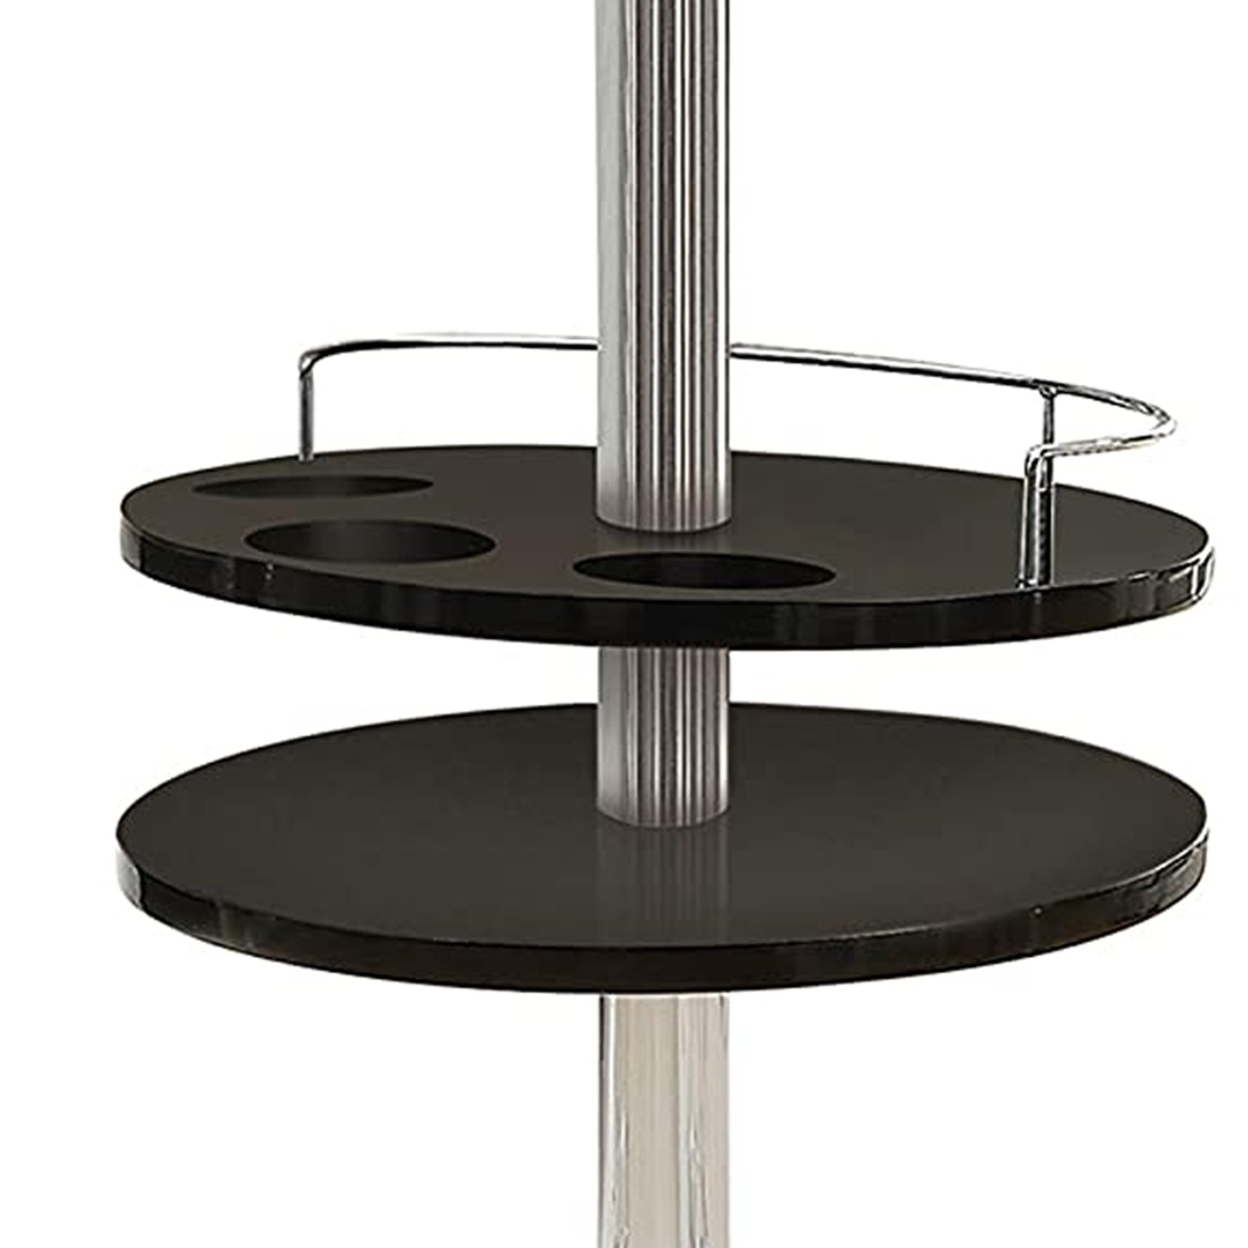 Round Bar Table With Tempered Glass Top And Storage, Black And Chrome- Saltoro Sherpi